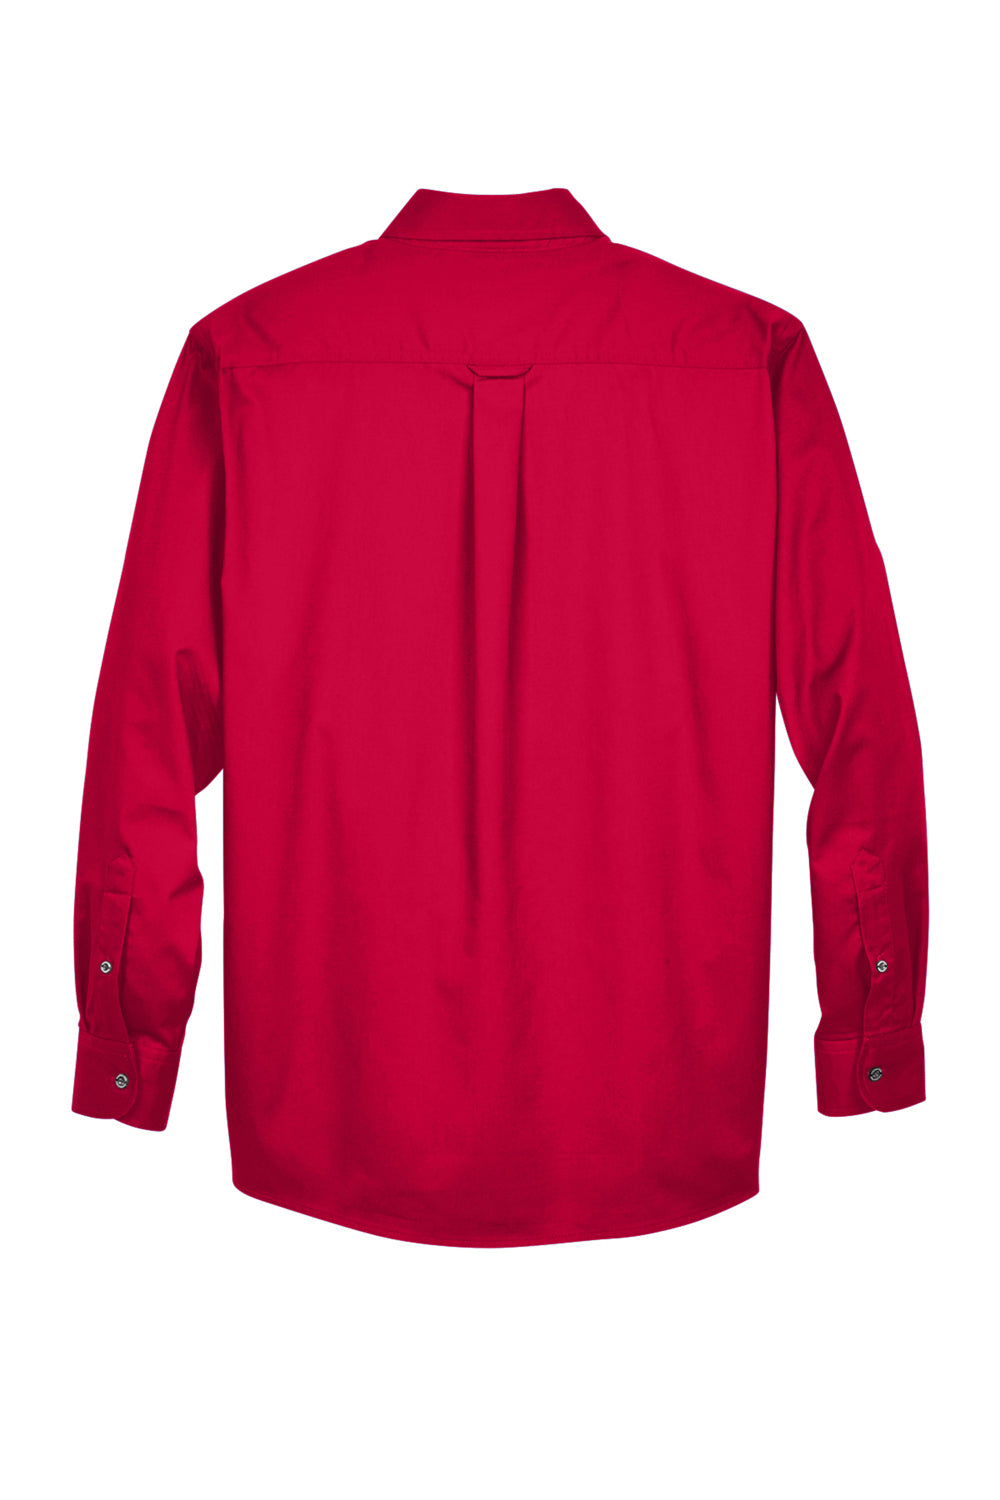 Harriton M500/M500T Wrinkle Resistant Long Sleeve Button Down Shirt w/ Pocket Red Flat Back